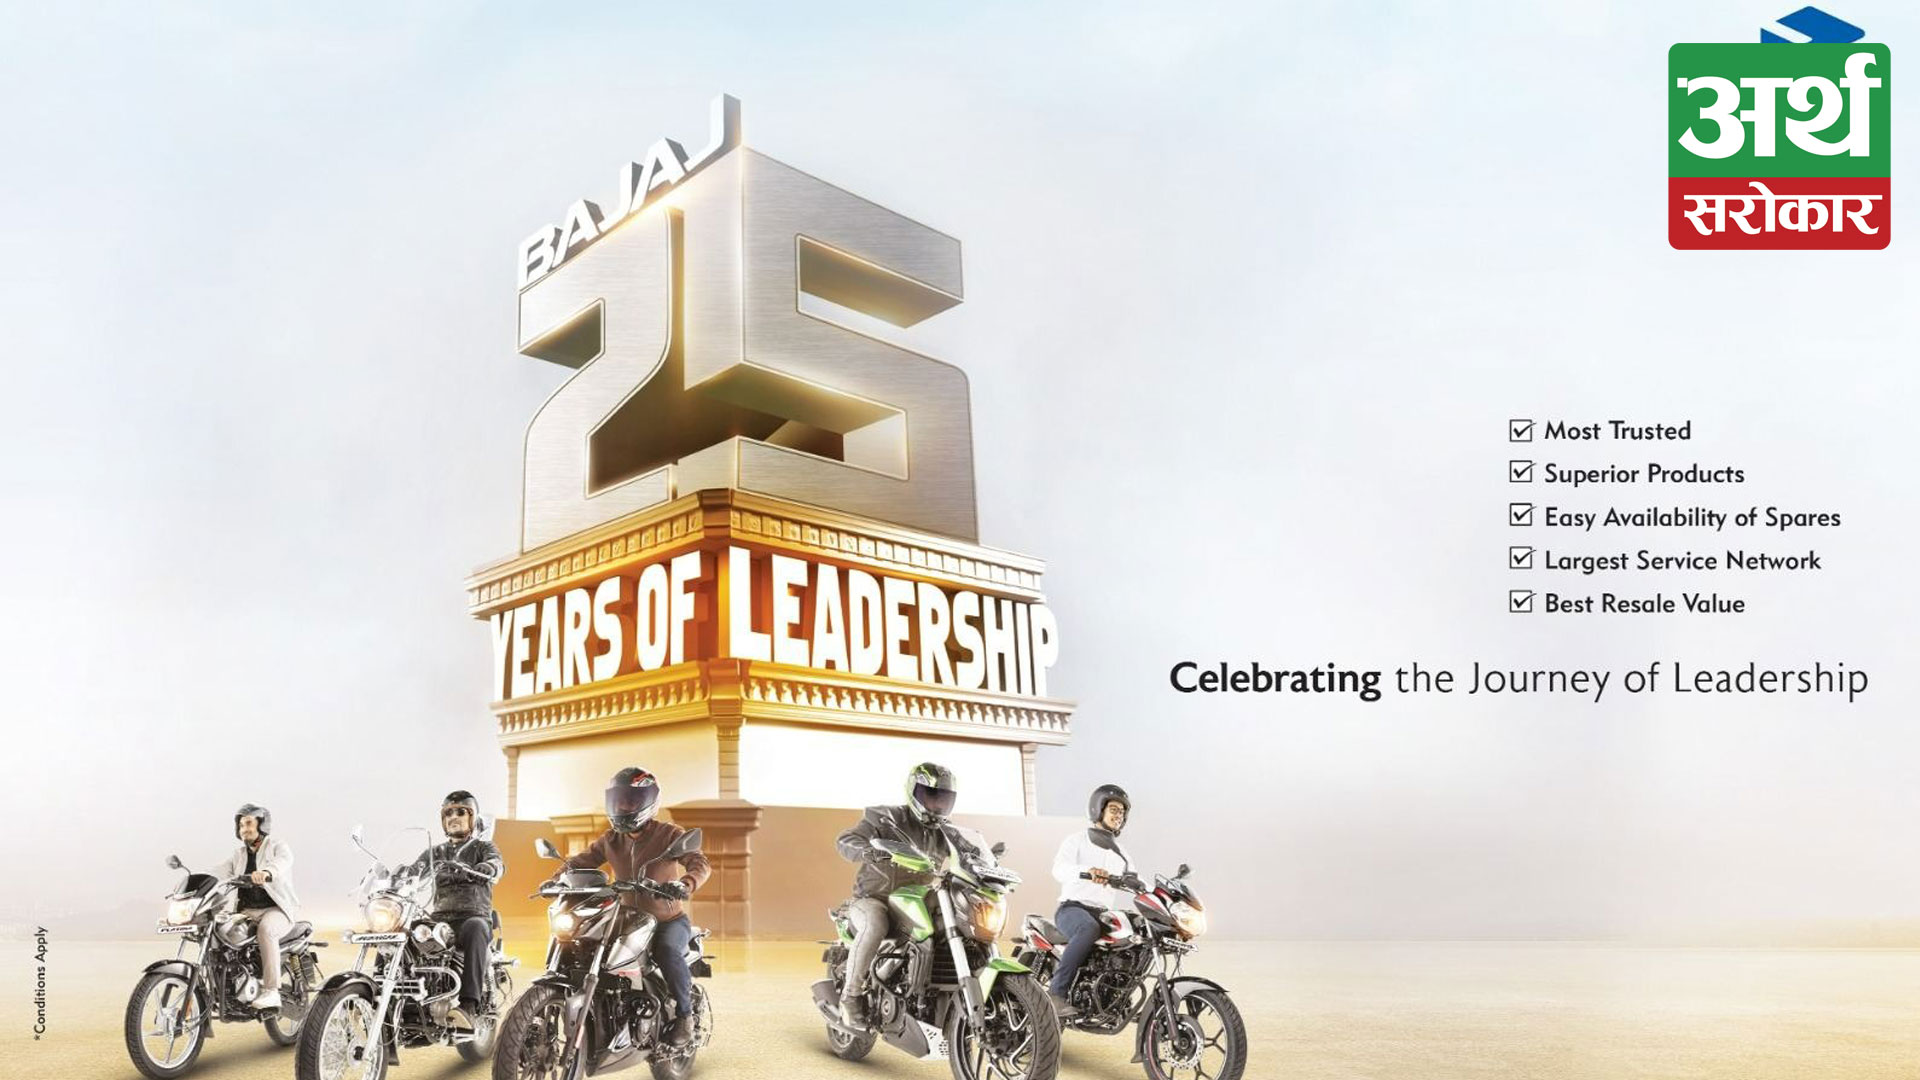 Bajaj Concludes ’25 Years of Leadership’ Campaign